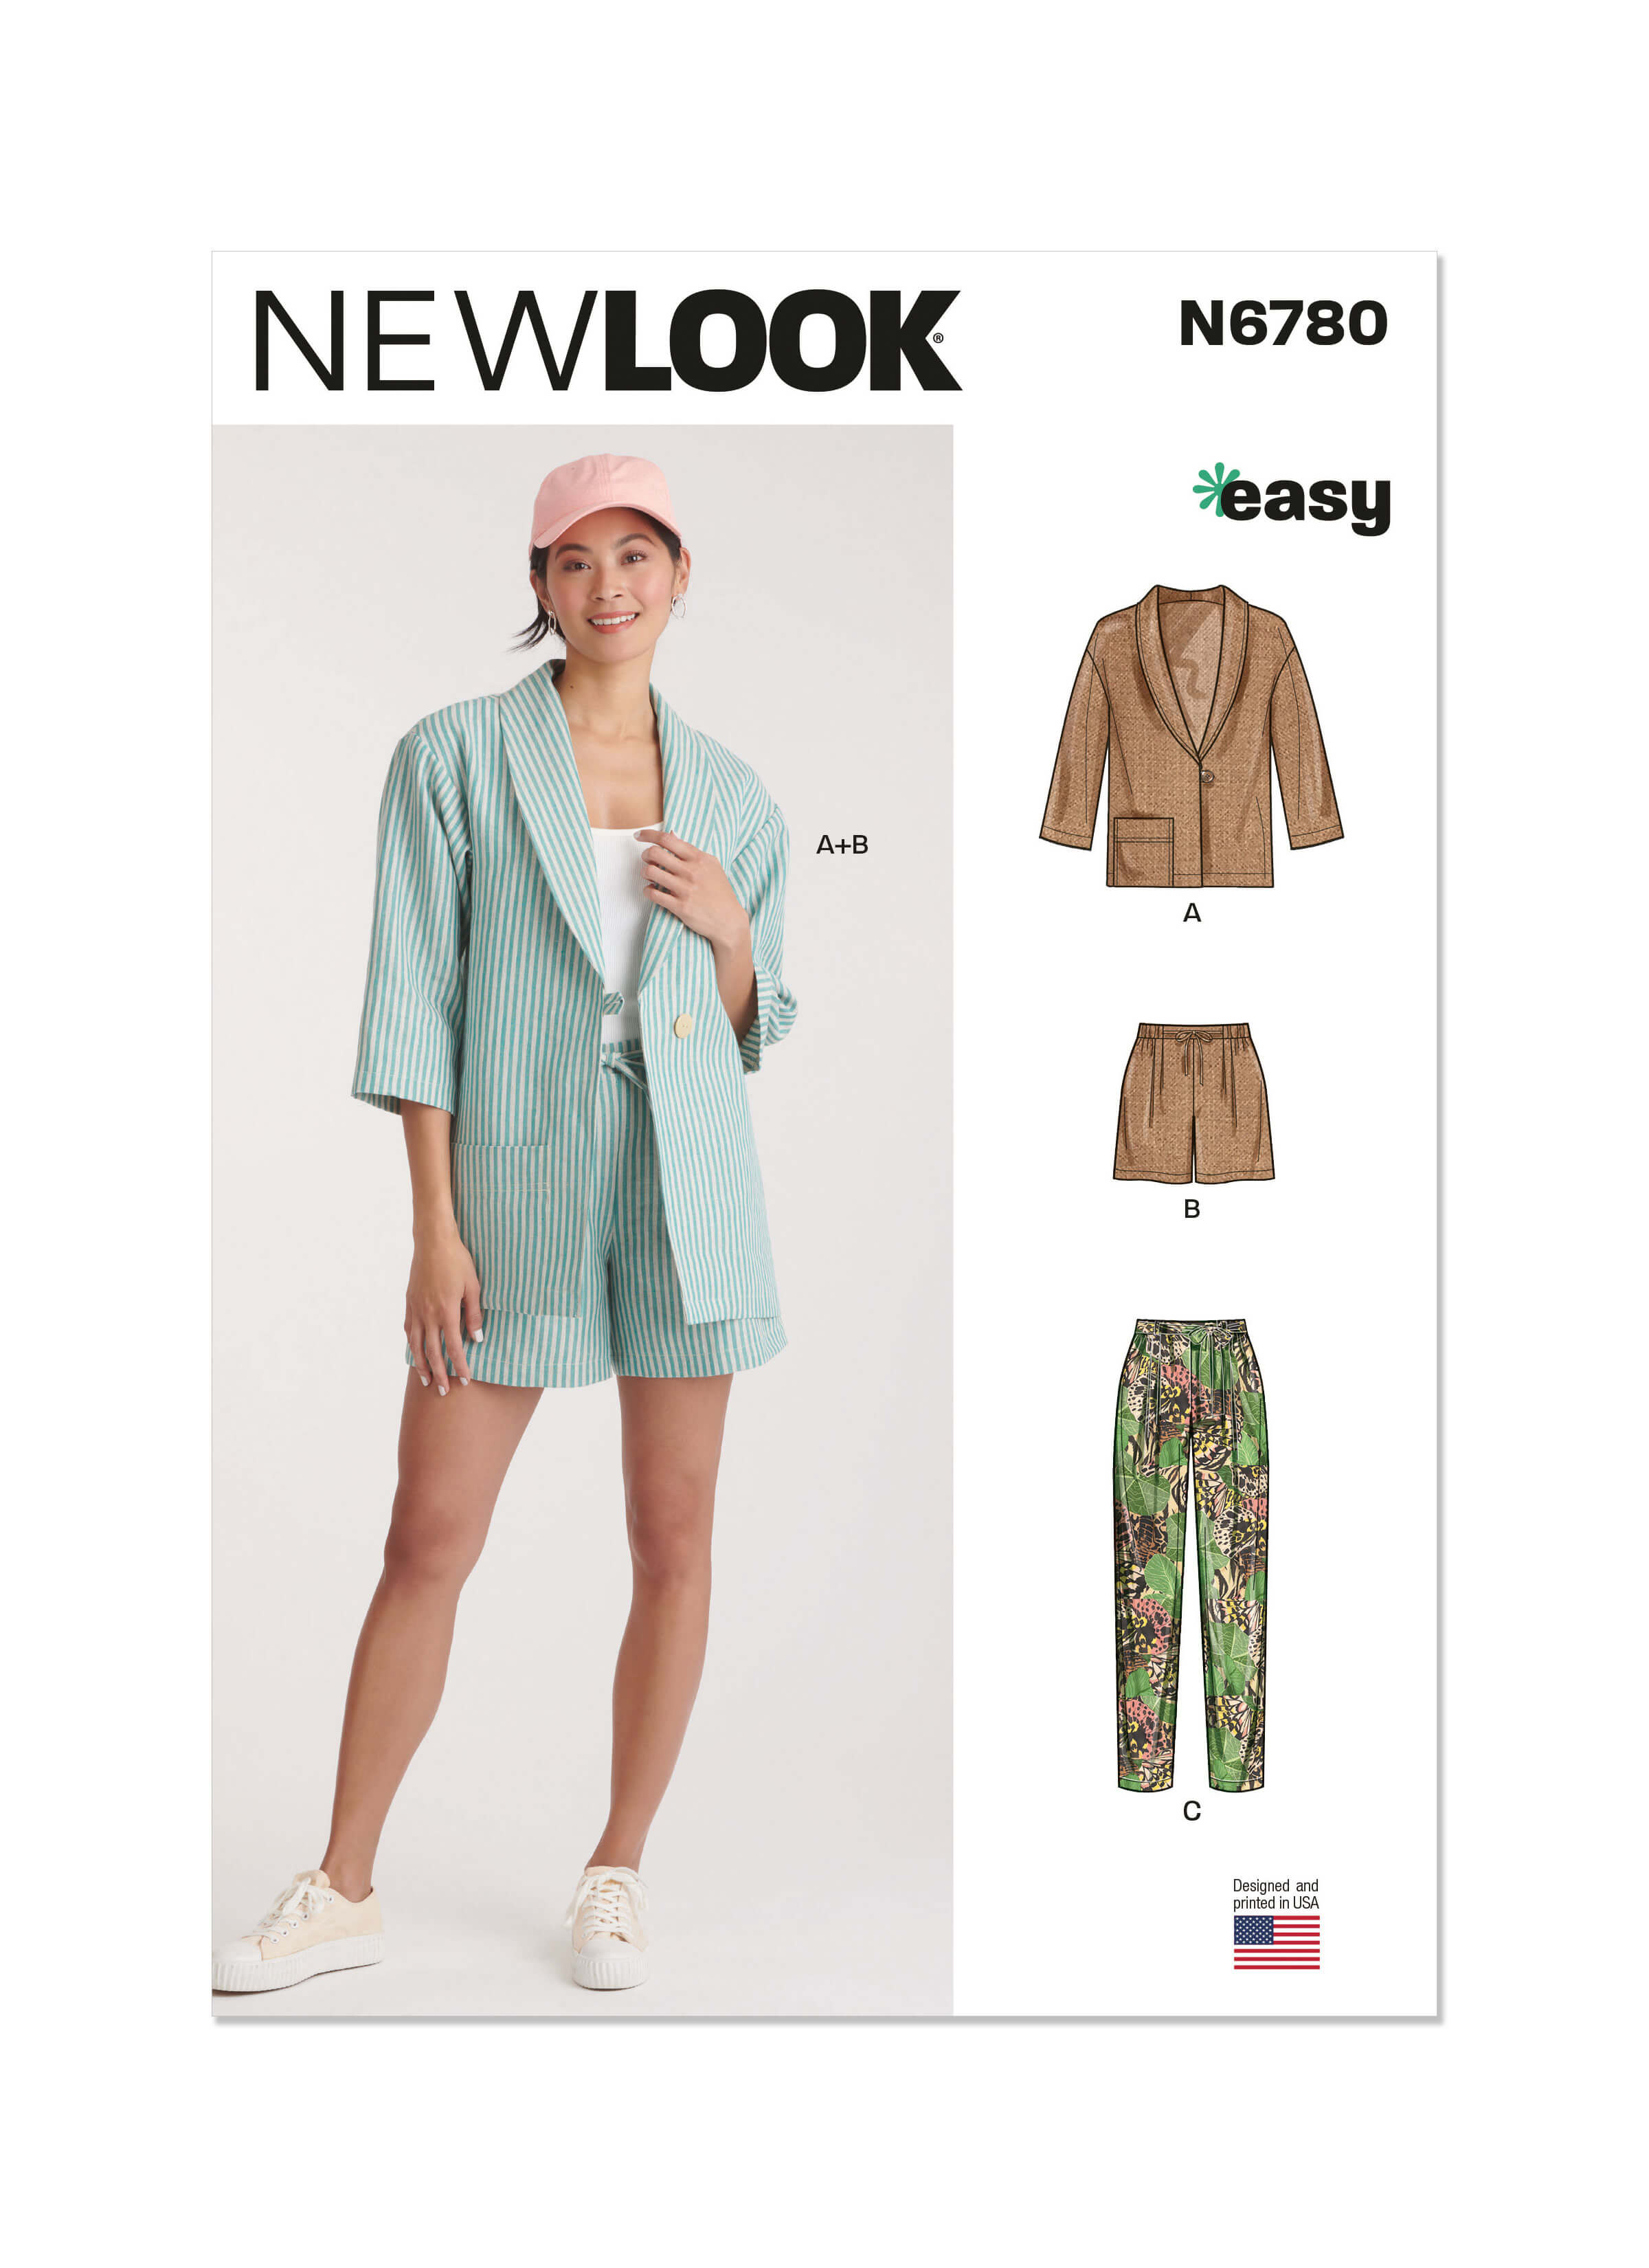 New Look Sewing Pattern N6780 Misses' Jacket, Shorts and Trousers